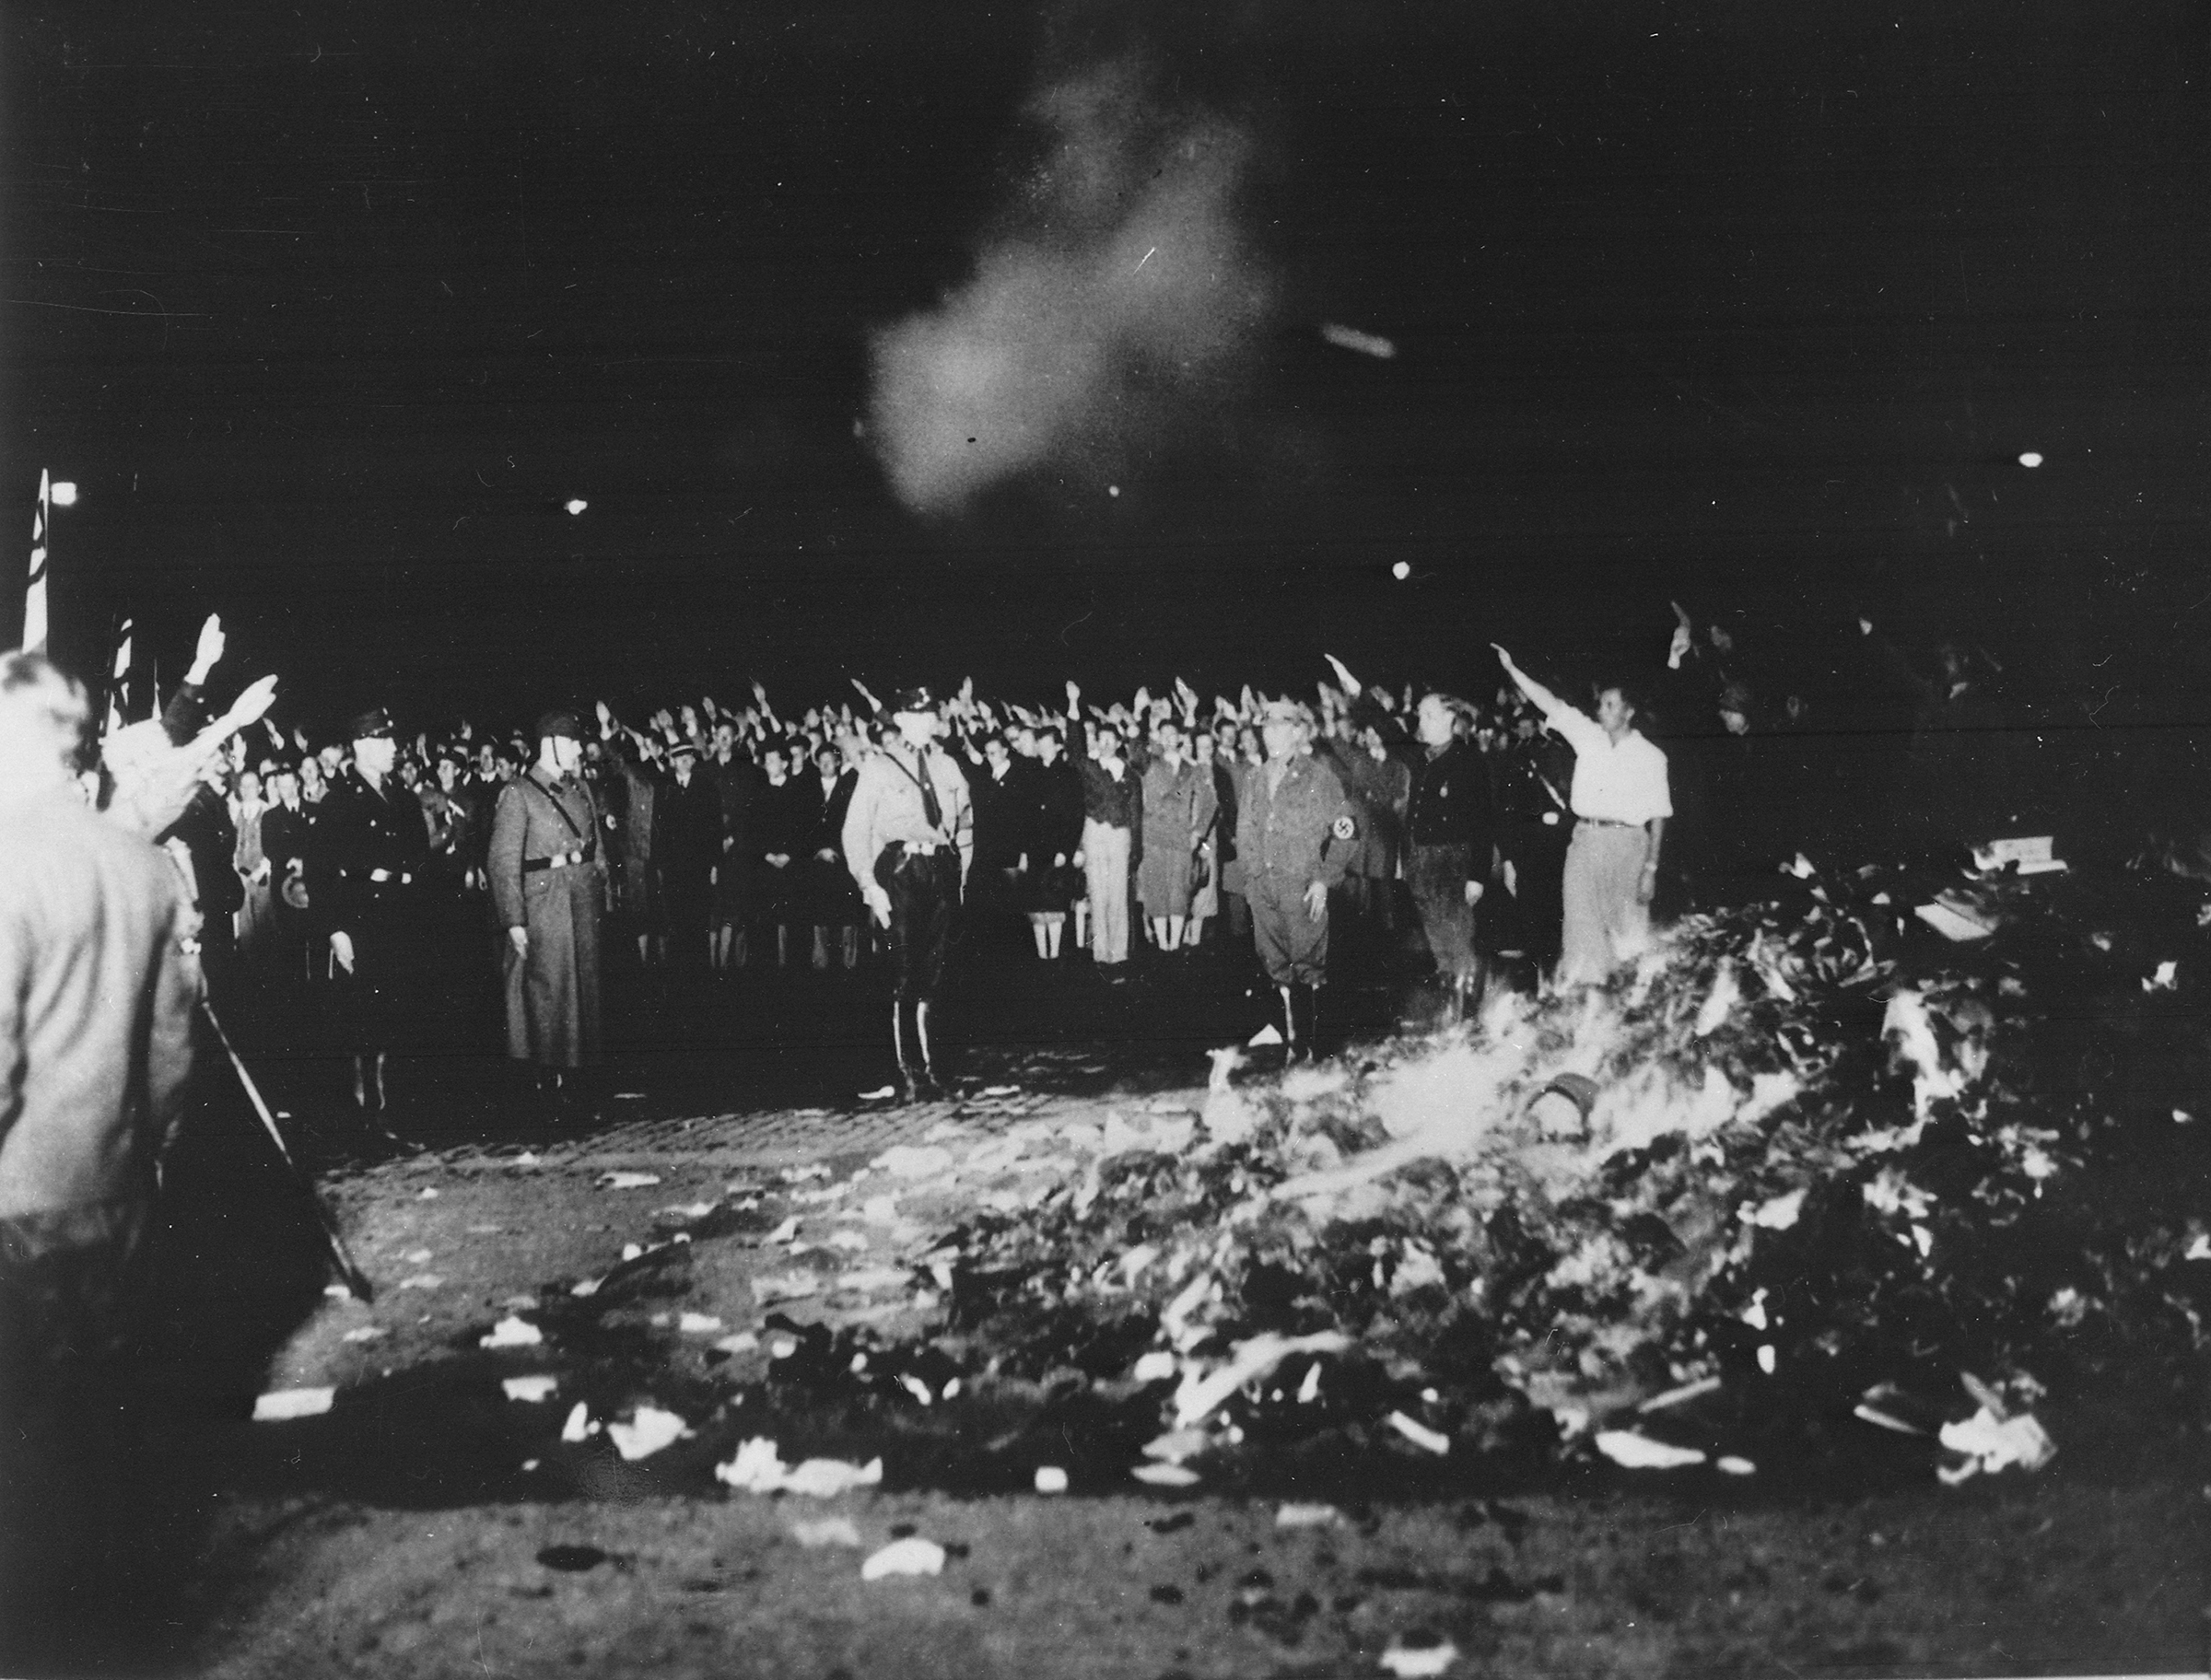 A Nazi book burning in Berlin's Opera Plaza on May 11, 1933. Photo by Georg Pahl/German Federal Archive/Creative Commons